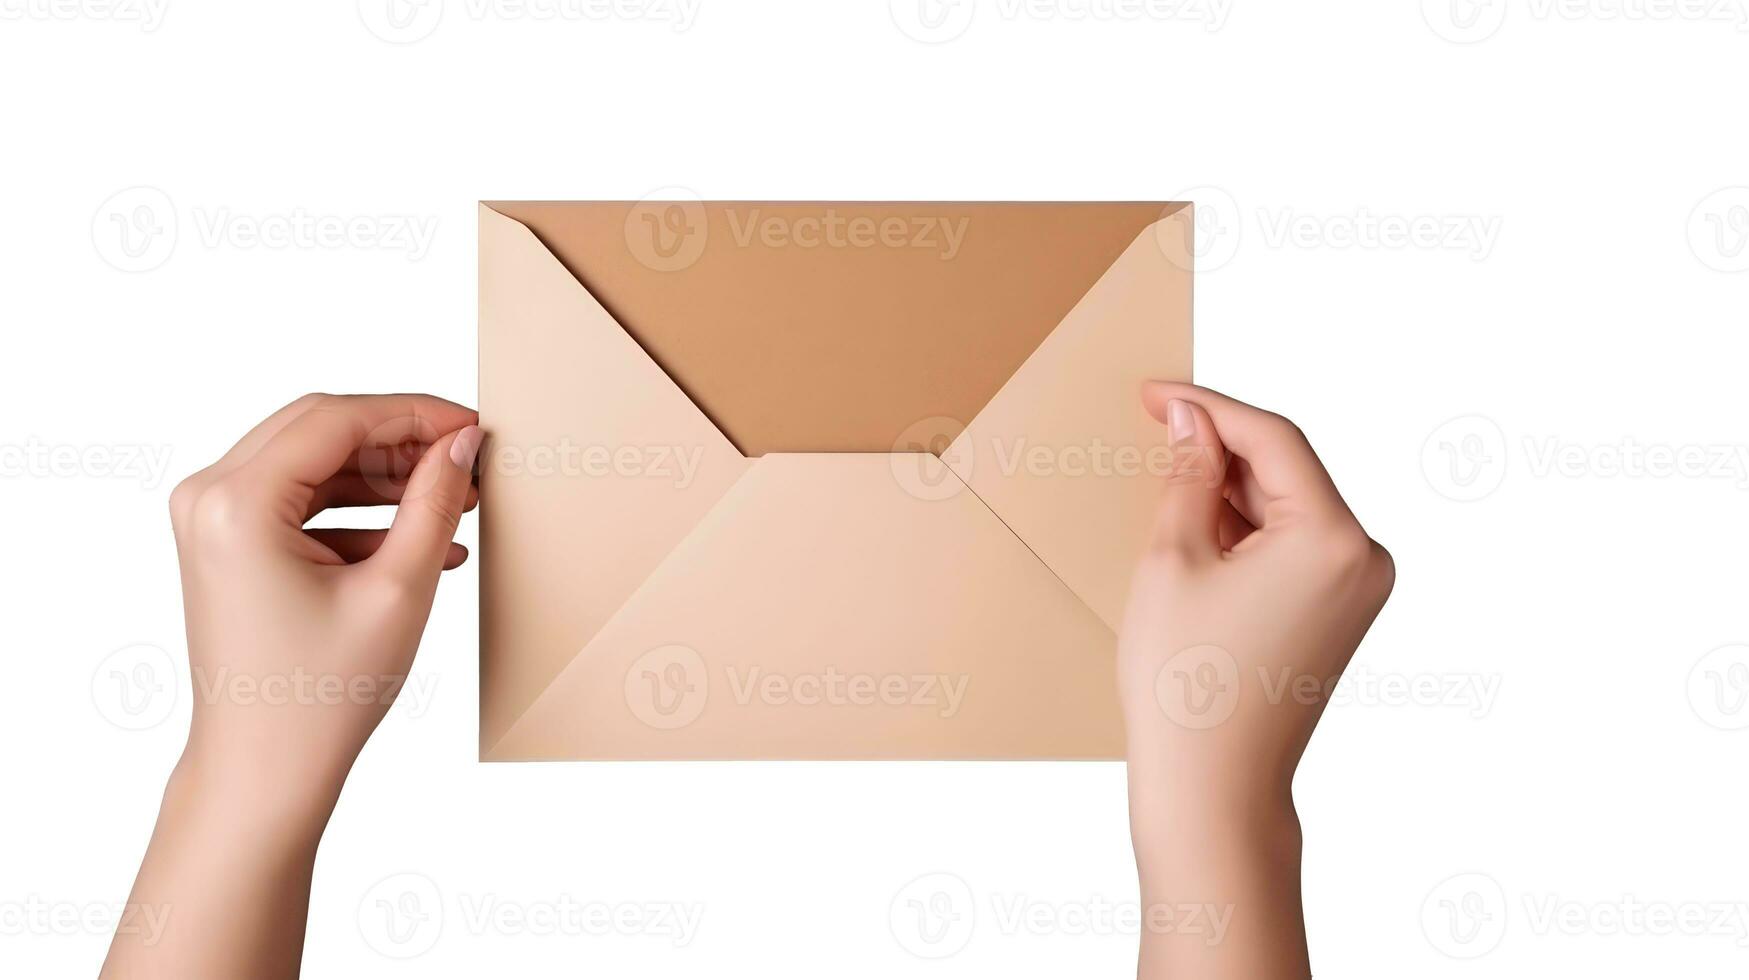 Top View Photo of Female Hand Holding Envelope on White Background.